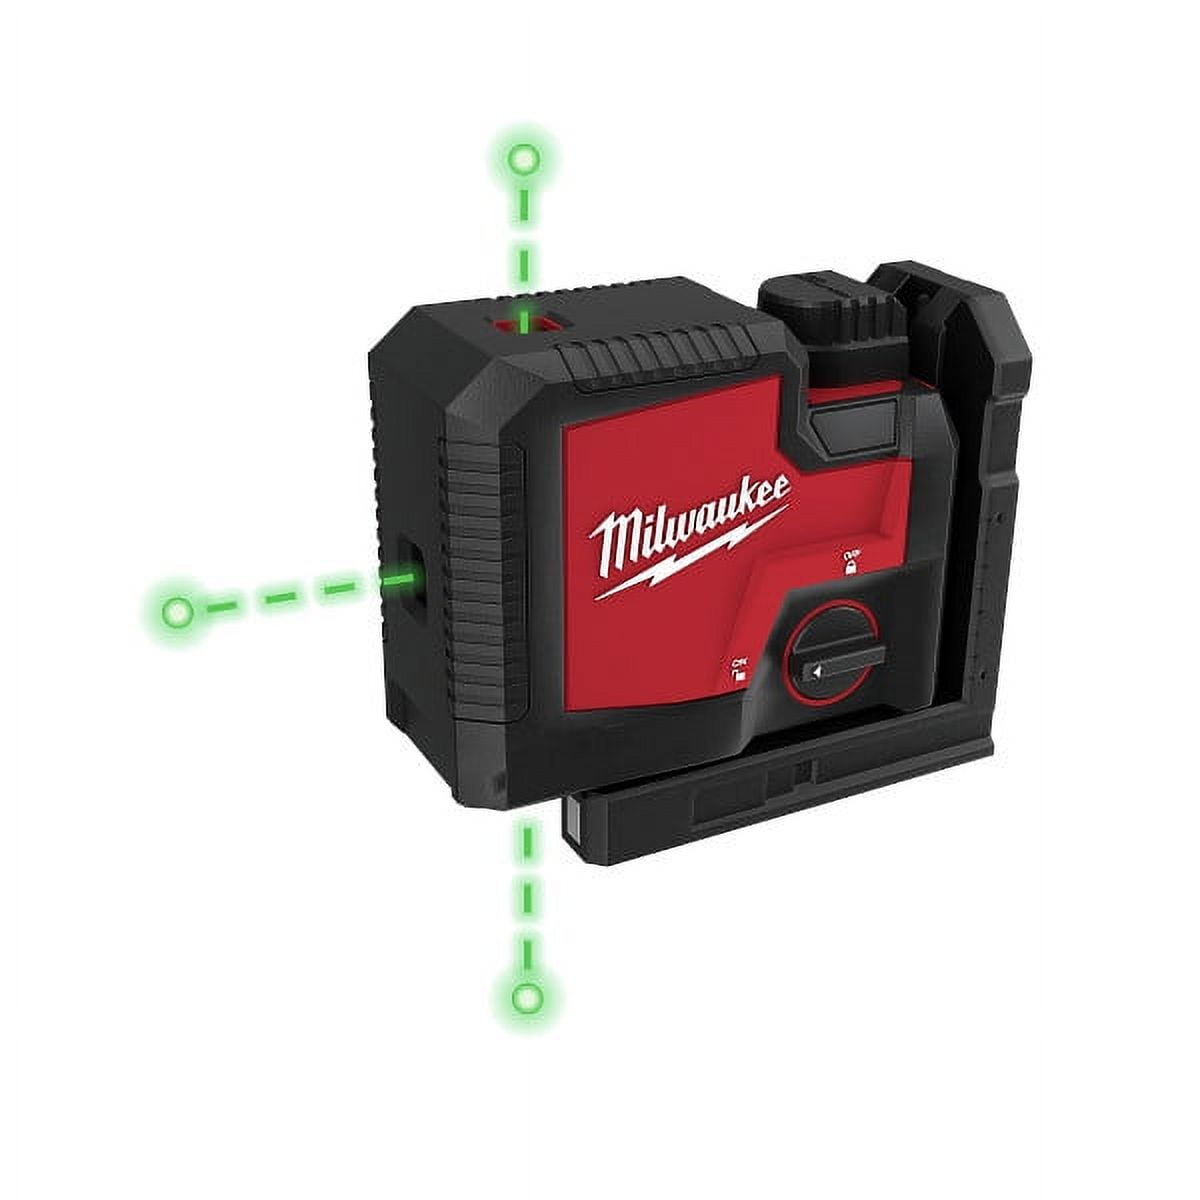 Milwaukee Electric Tool 3510-21 Green Beam Laser 3 Point USB Rechargeable